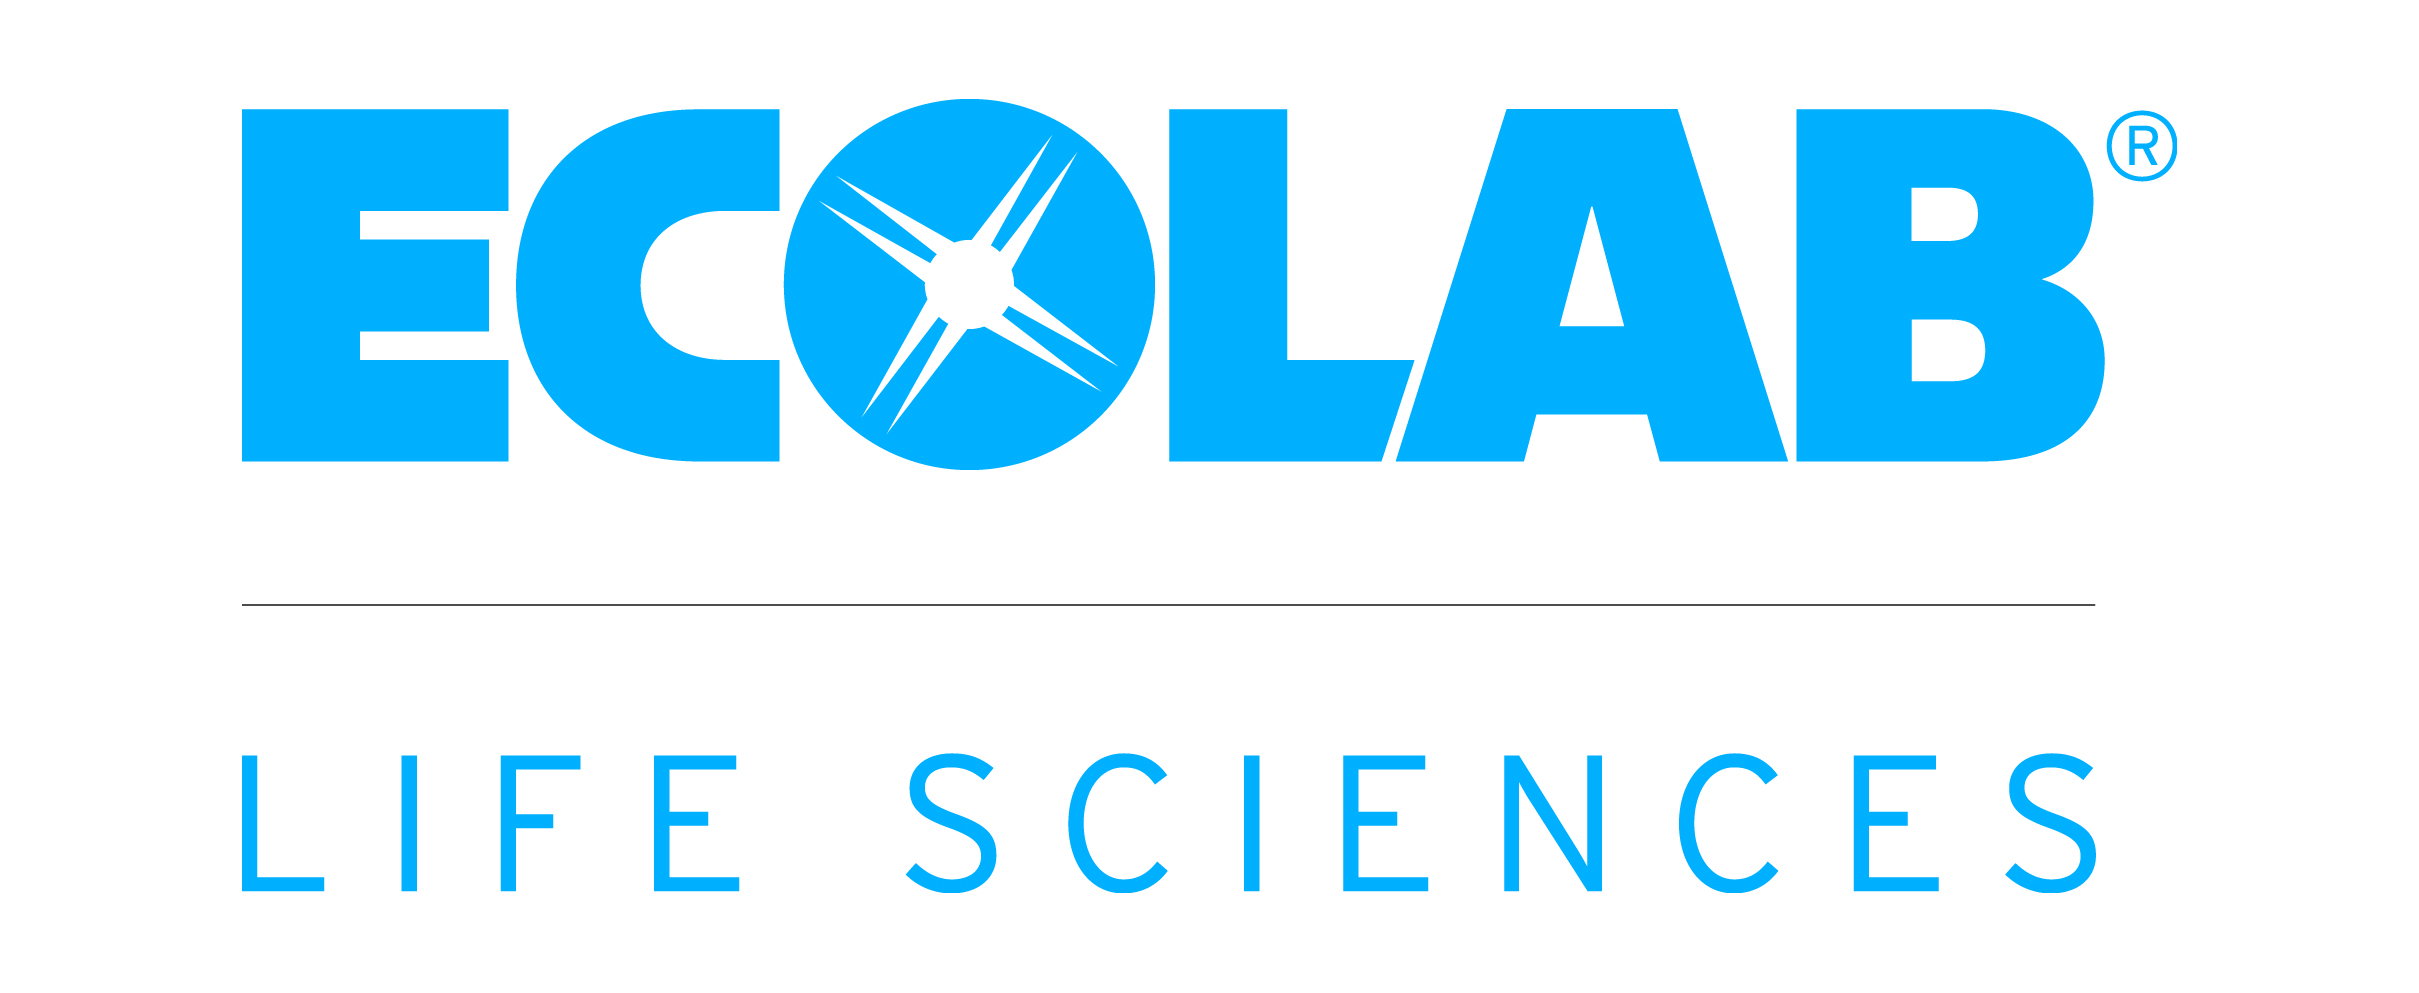 Ecolab_logo_overview